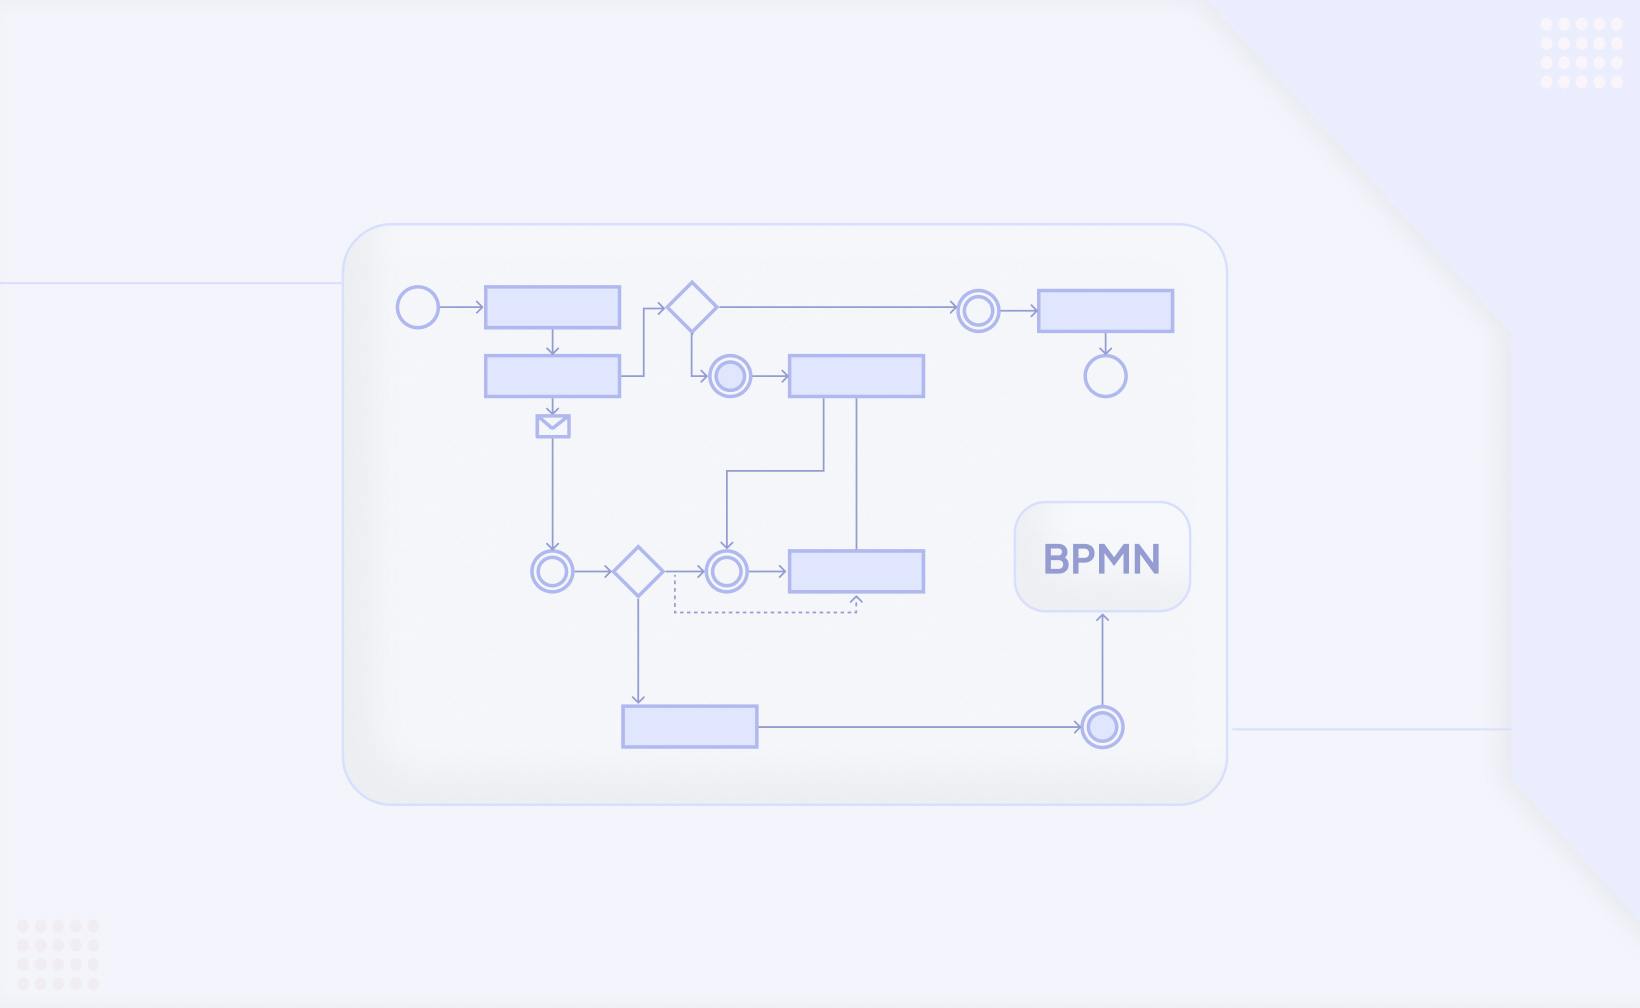 Creating a BPMN Viewer and Editor: A Visual Guide